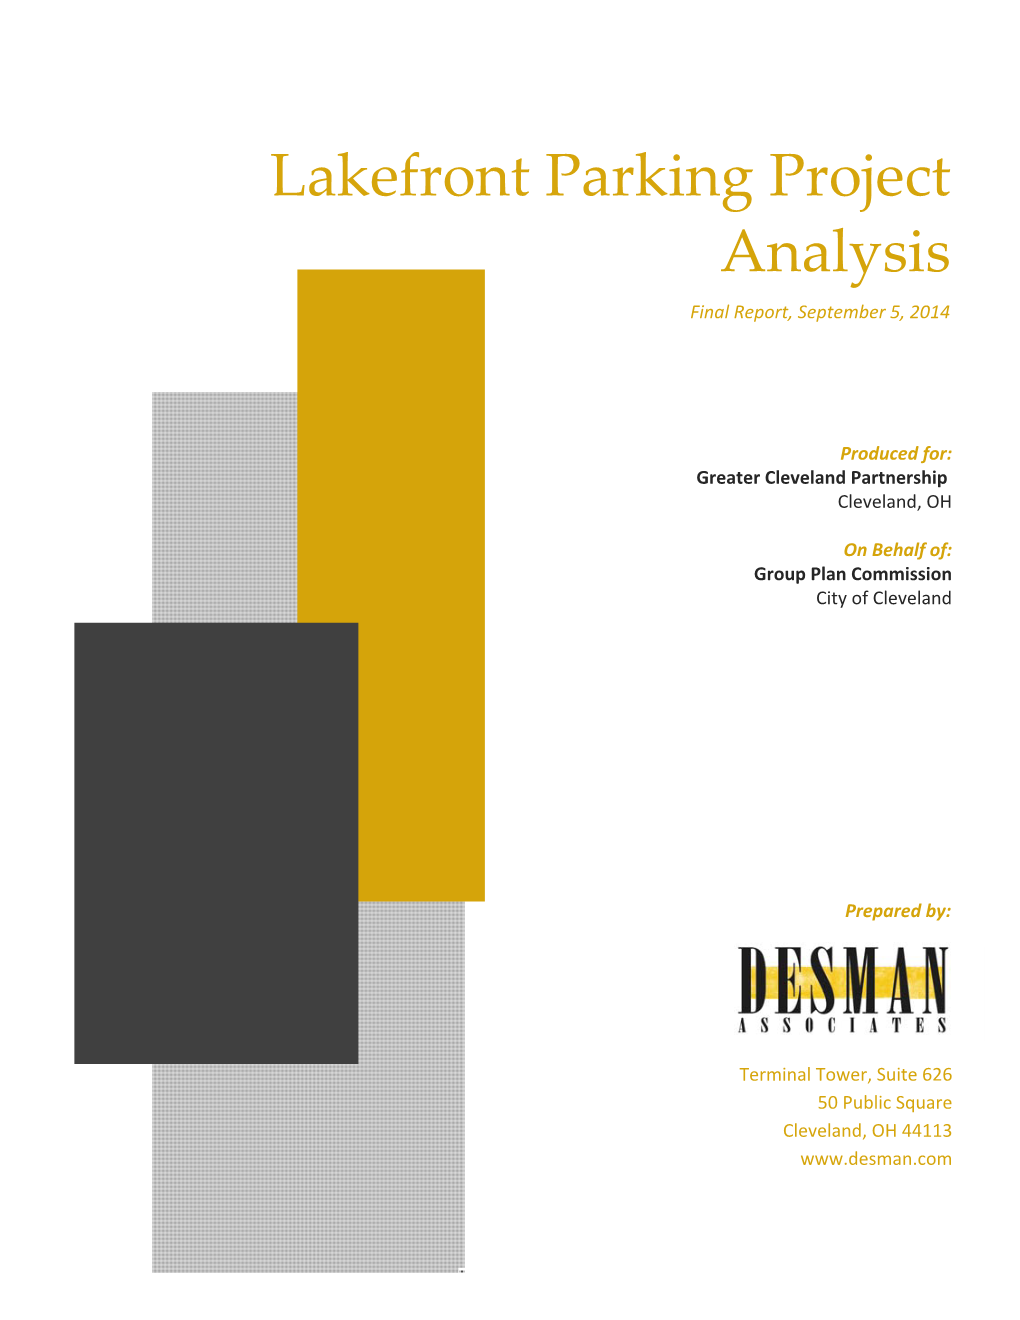 Lakefront Parking Project Analysis Final Report, September 5, 2014